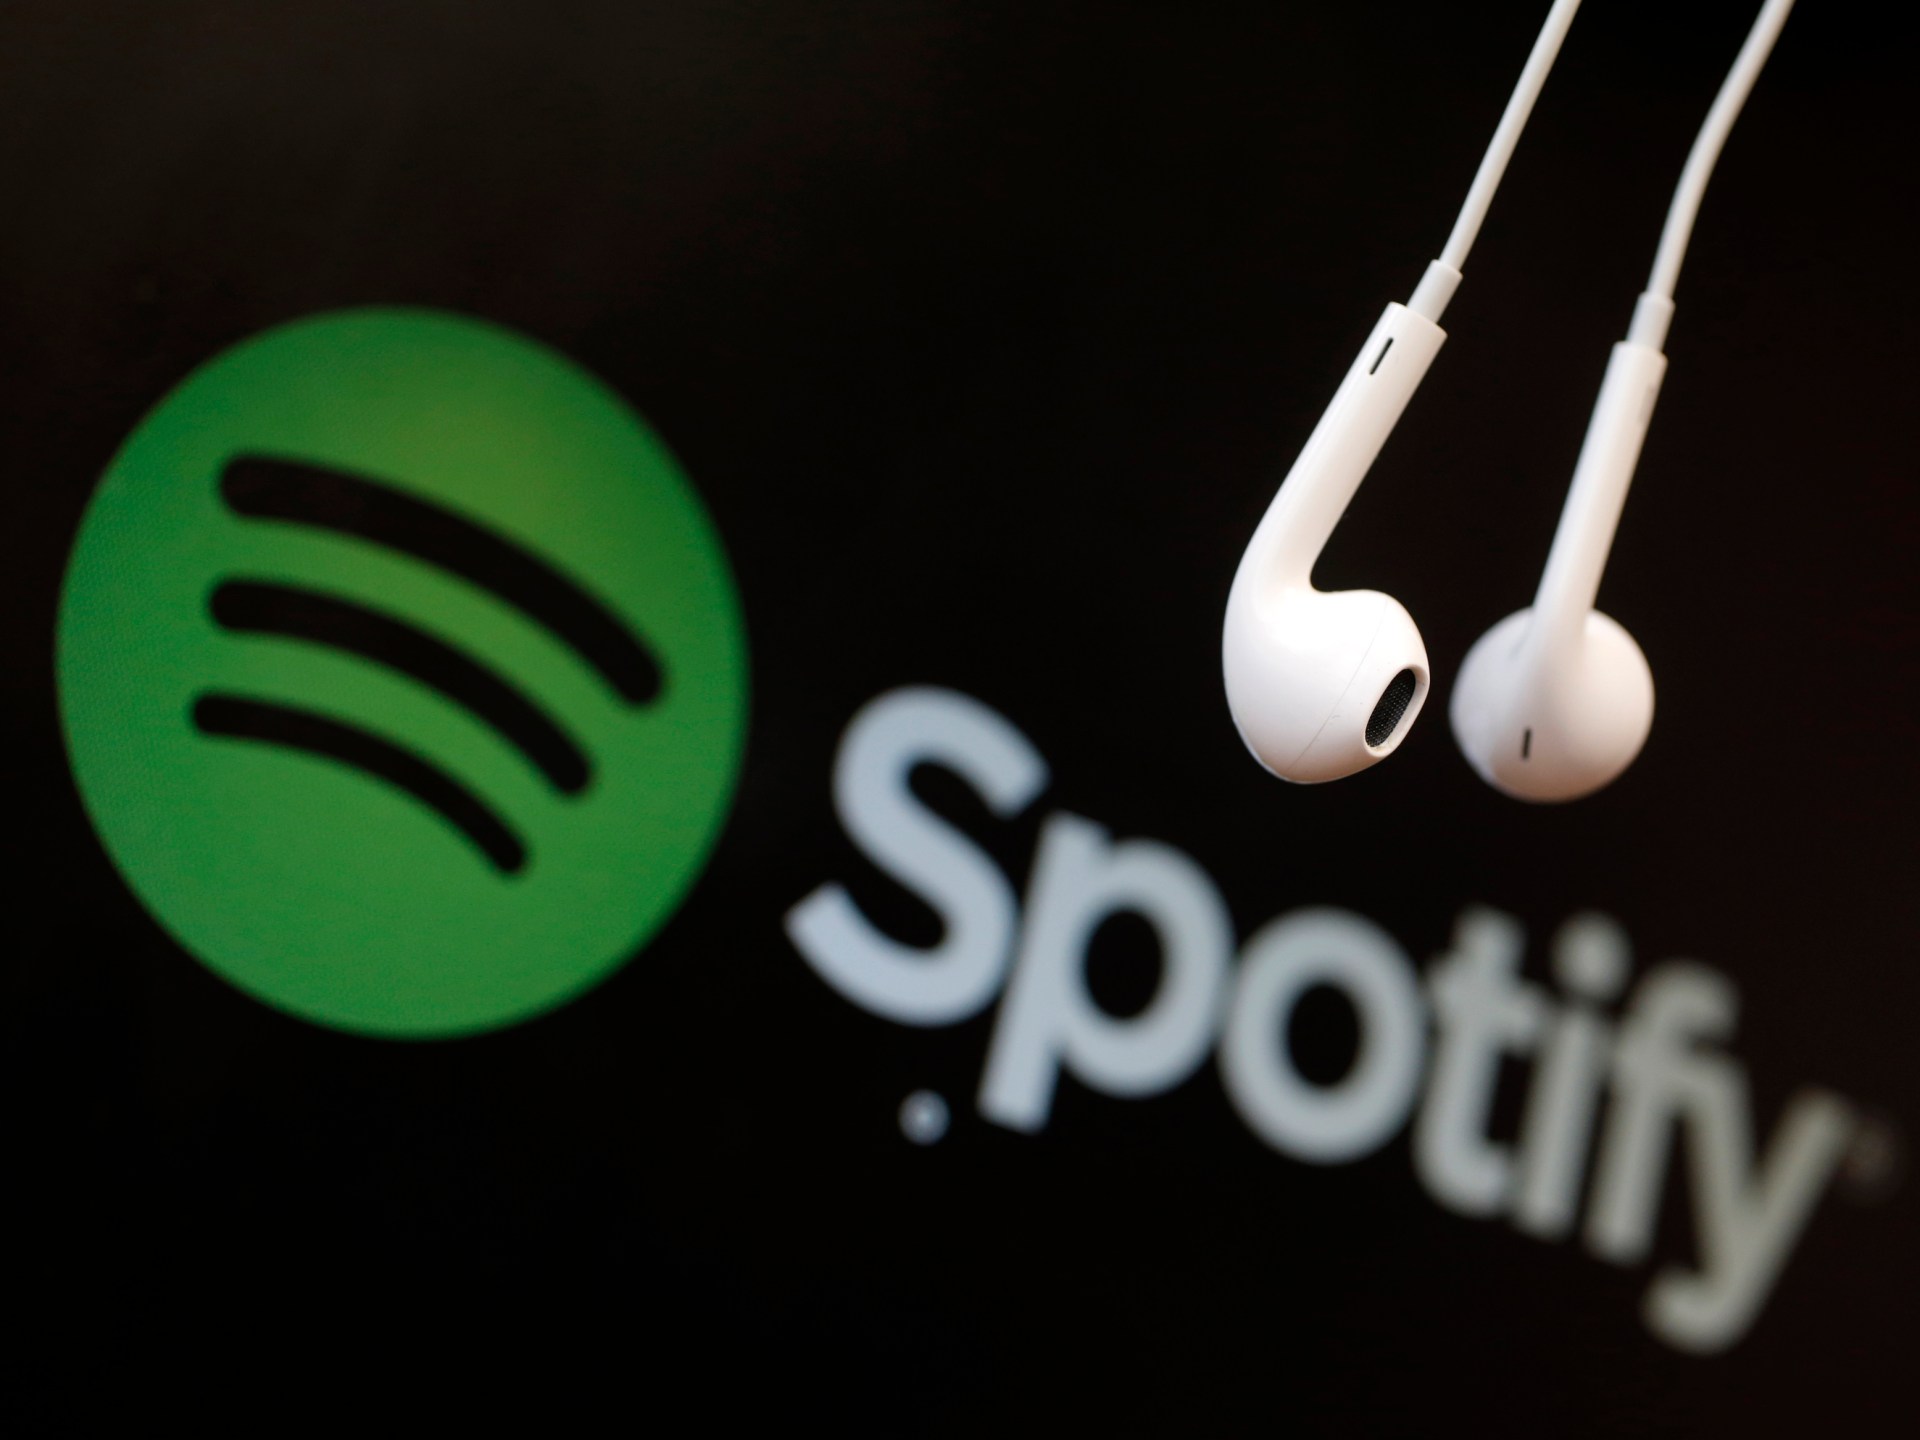 Spotify to announce layoffs as quickly as this week: Bloomberg